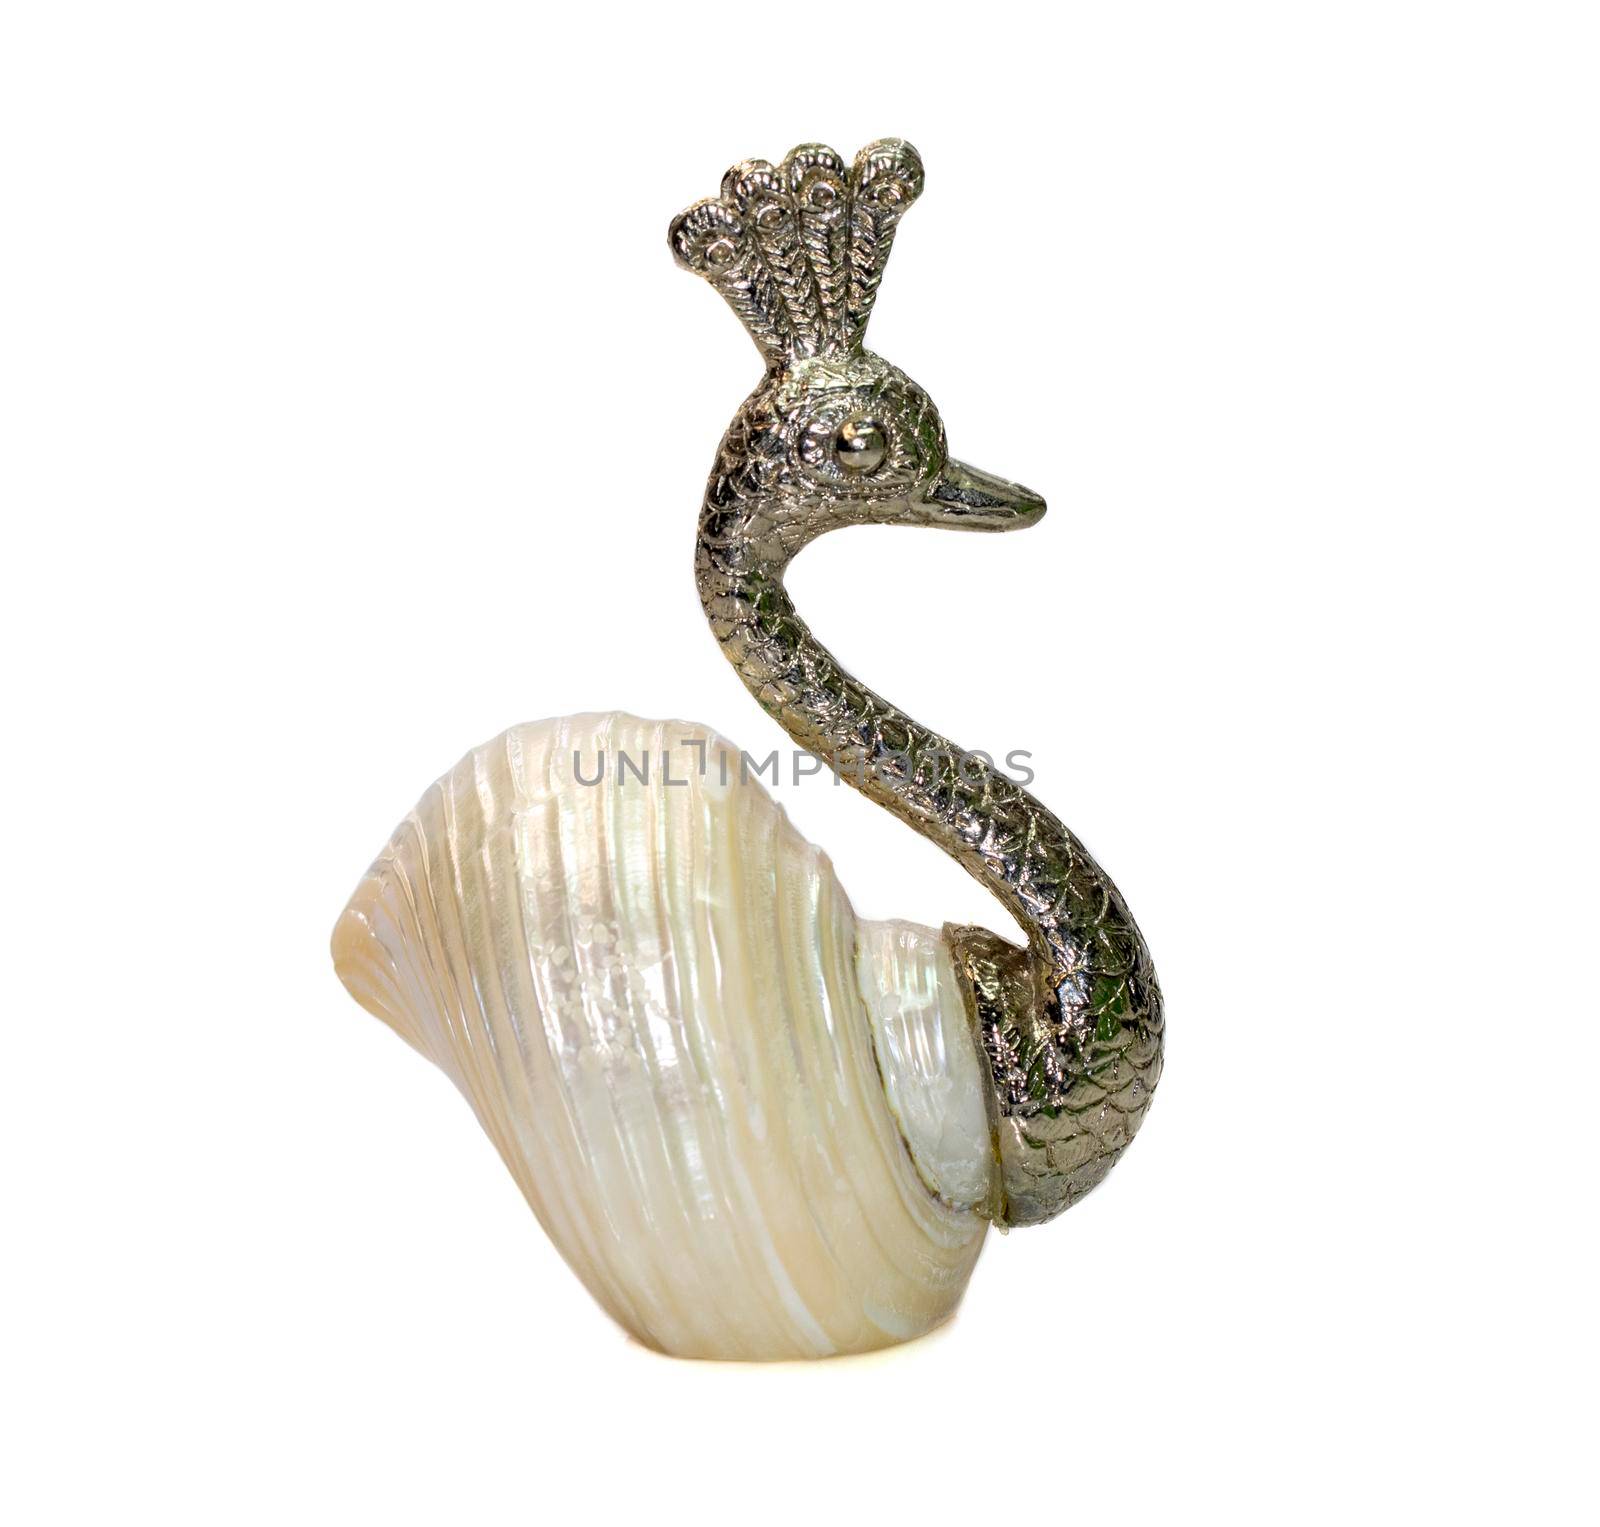 Image of peacock sculpture with shells as part of its body. isolated on white background. Home decoration by yod67